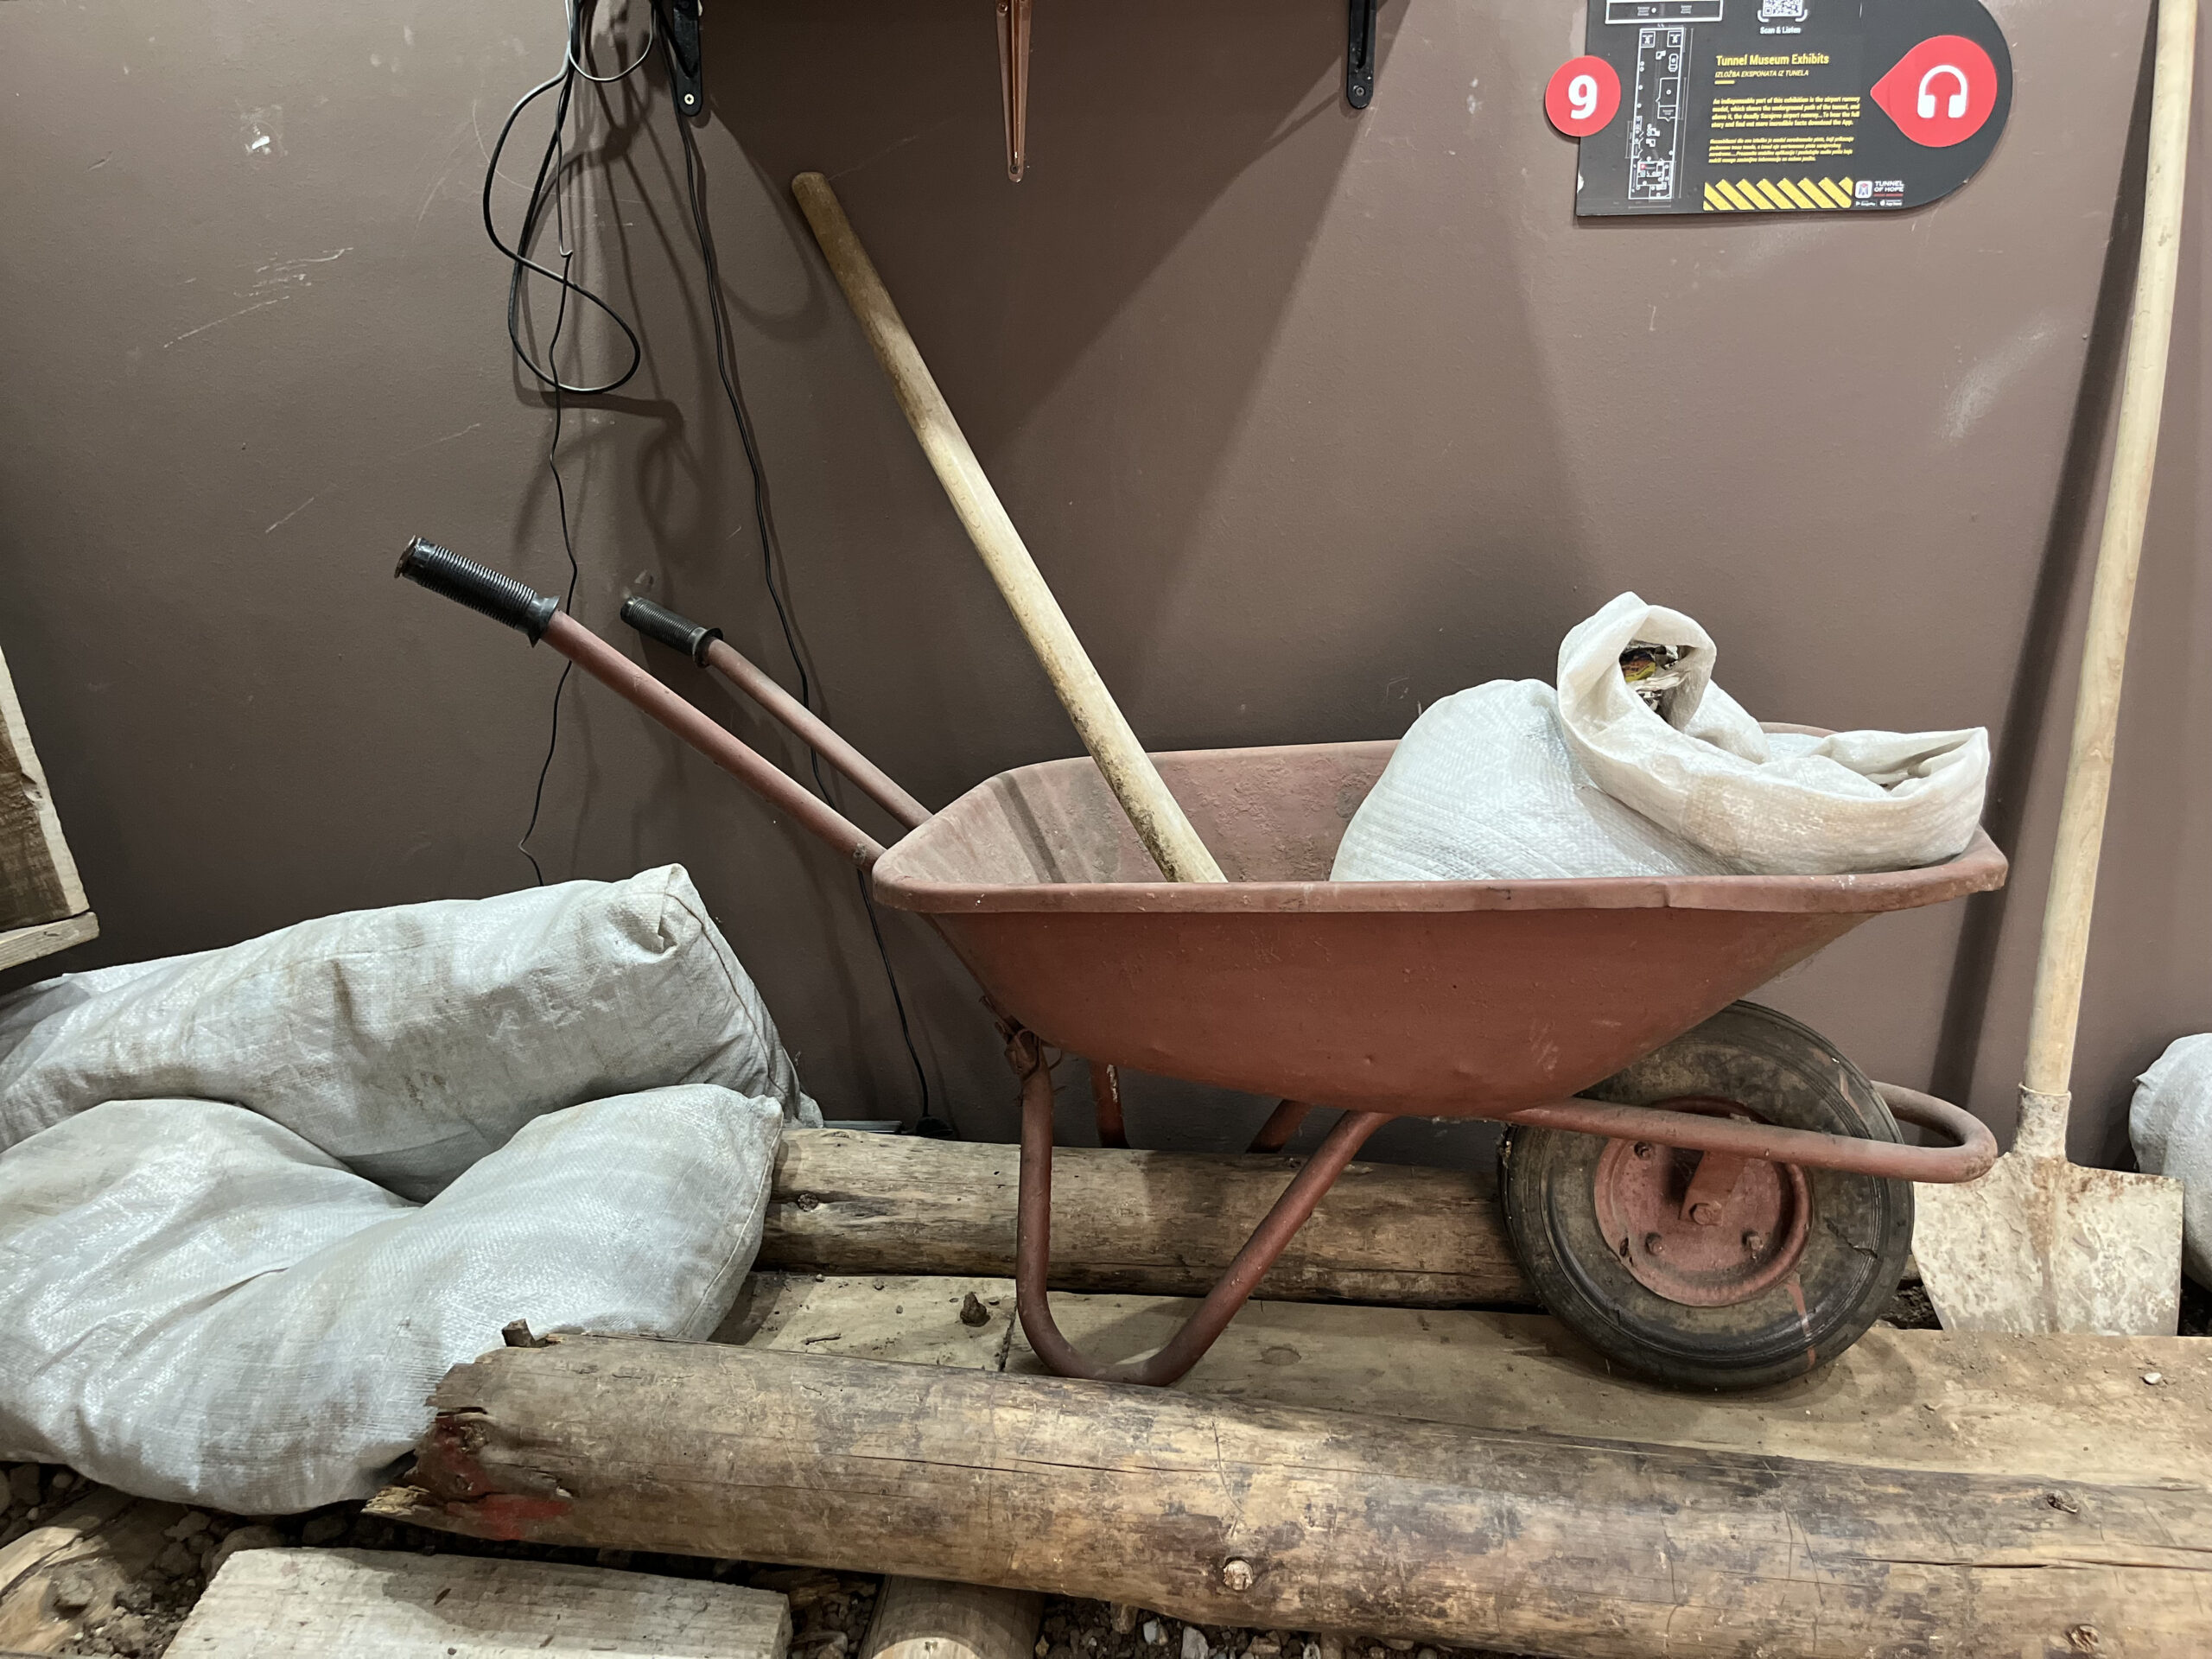 a wheelbarrow with a spade and sand bags inside is on display at the Tunnel of Hope